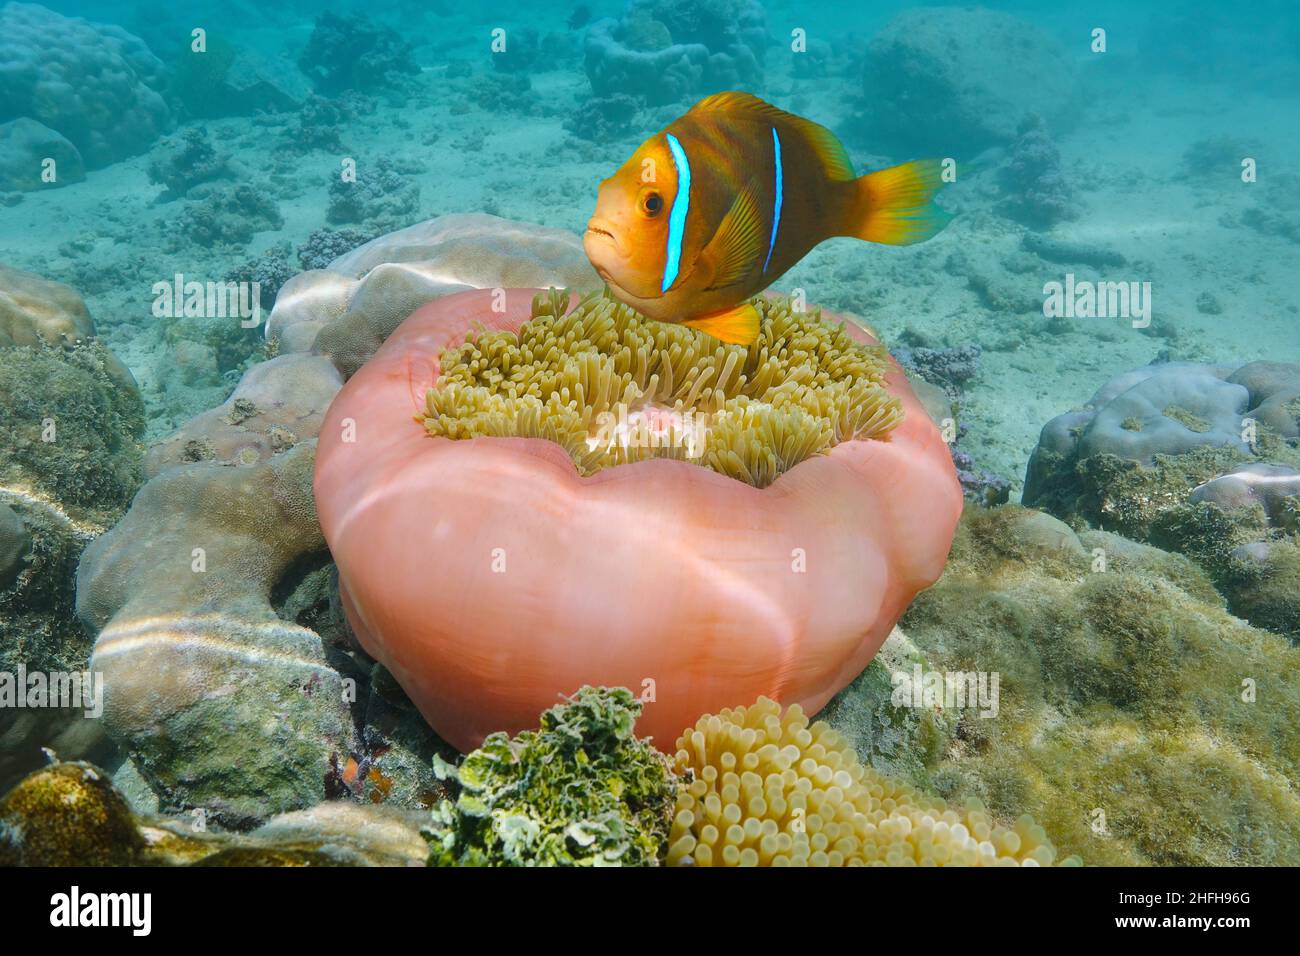 Anemonefish with sea anemone in the ocean (Amphiprion chrysopterus and Heteractis magnifica), south Pacific, French Polynesia Stock Photo